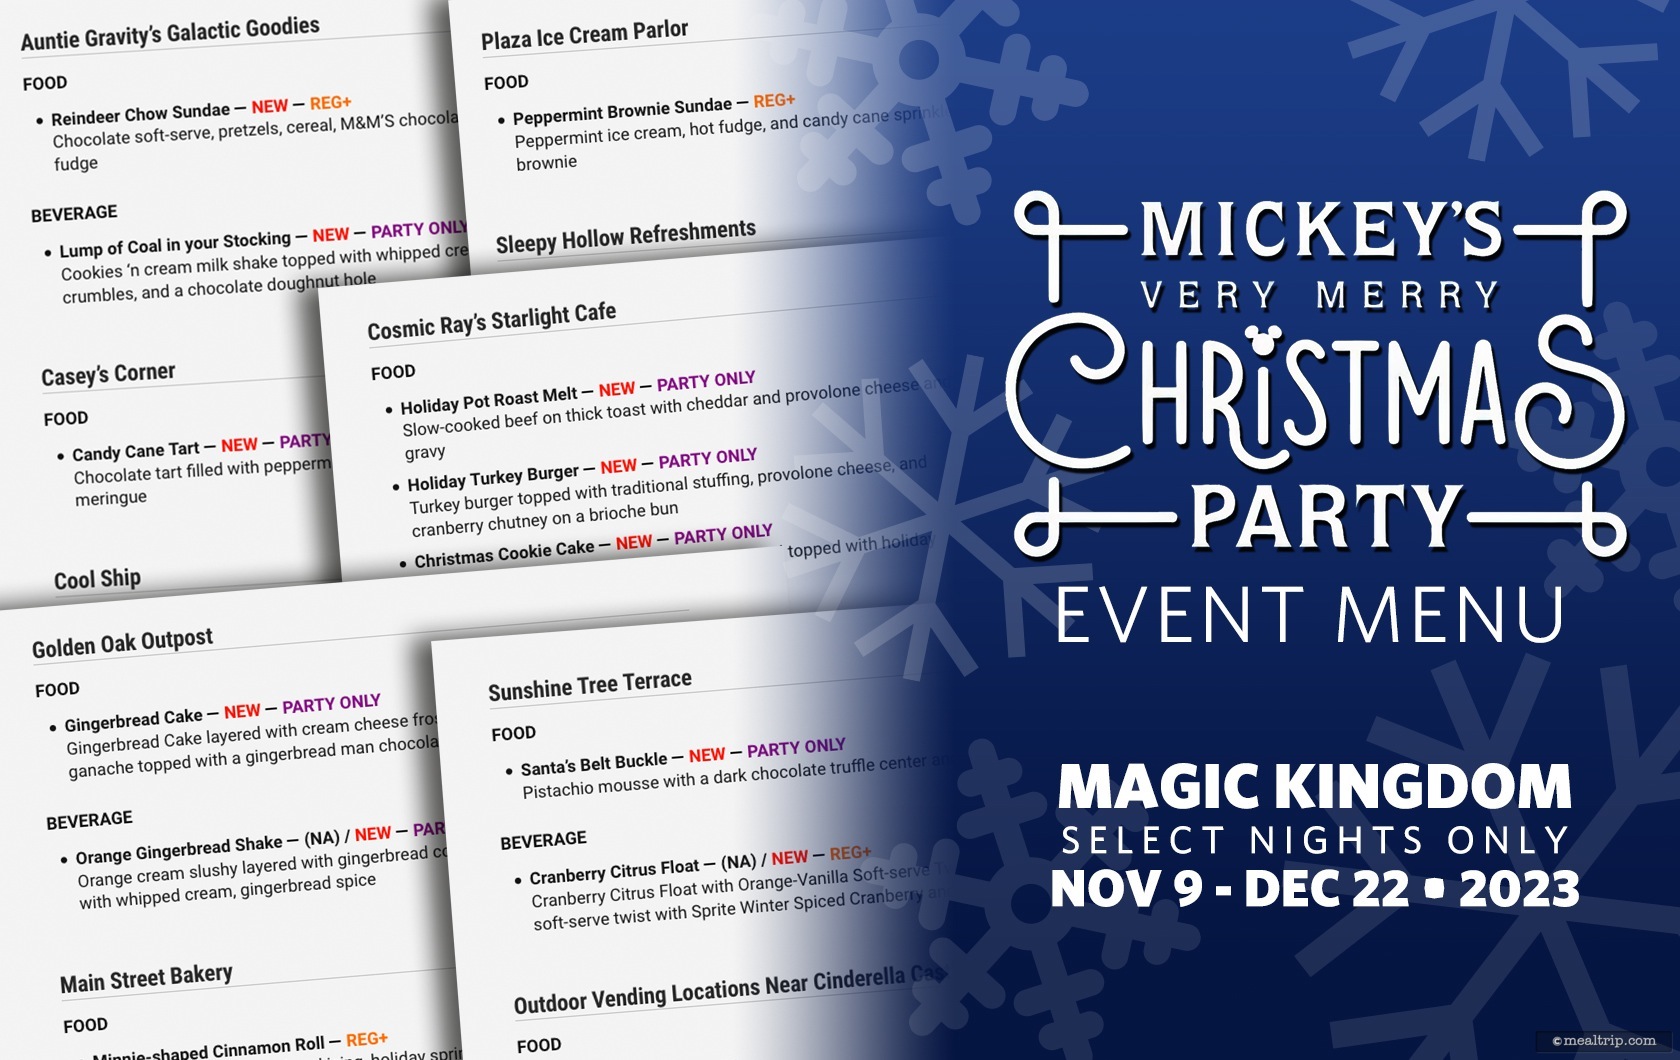 Food & Beverage Menu Items for Mickey's Very Merry Christmas Party (MVMCP) 2023